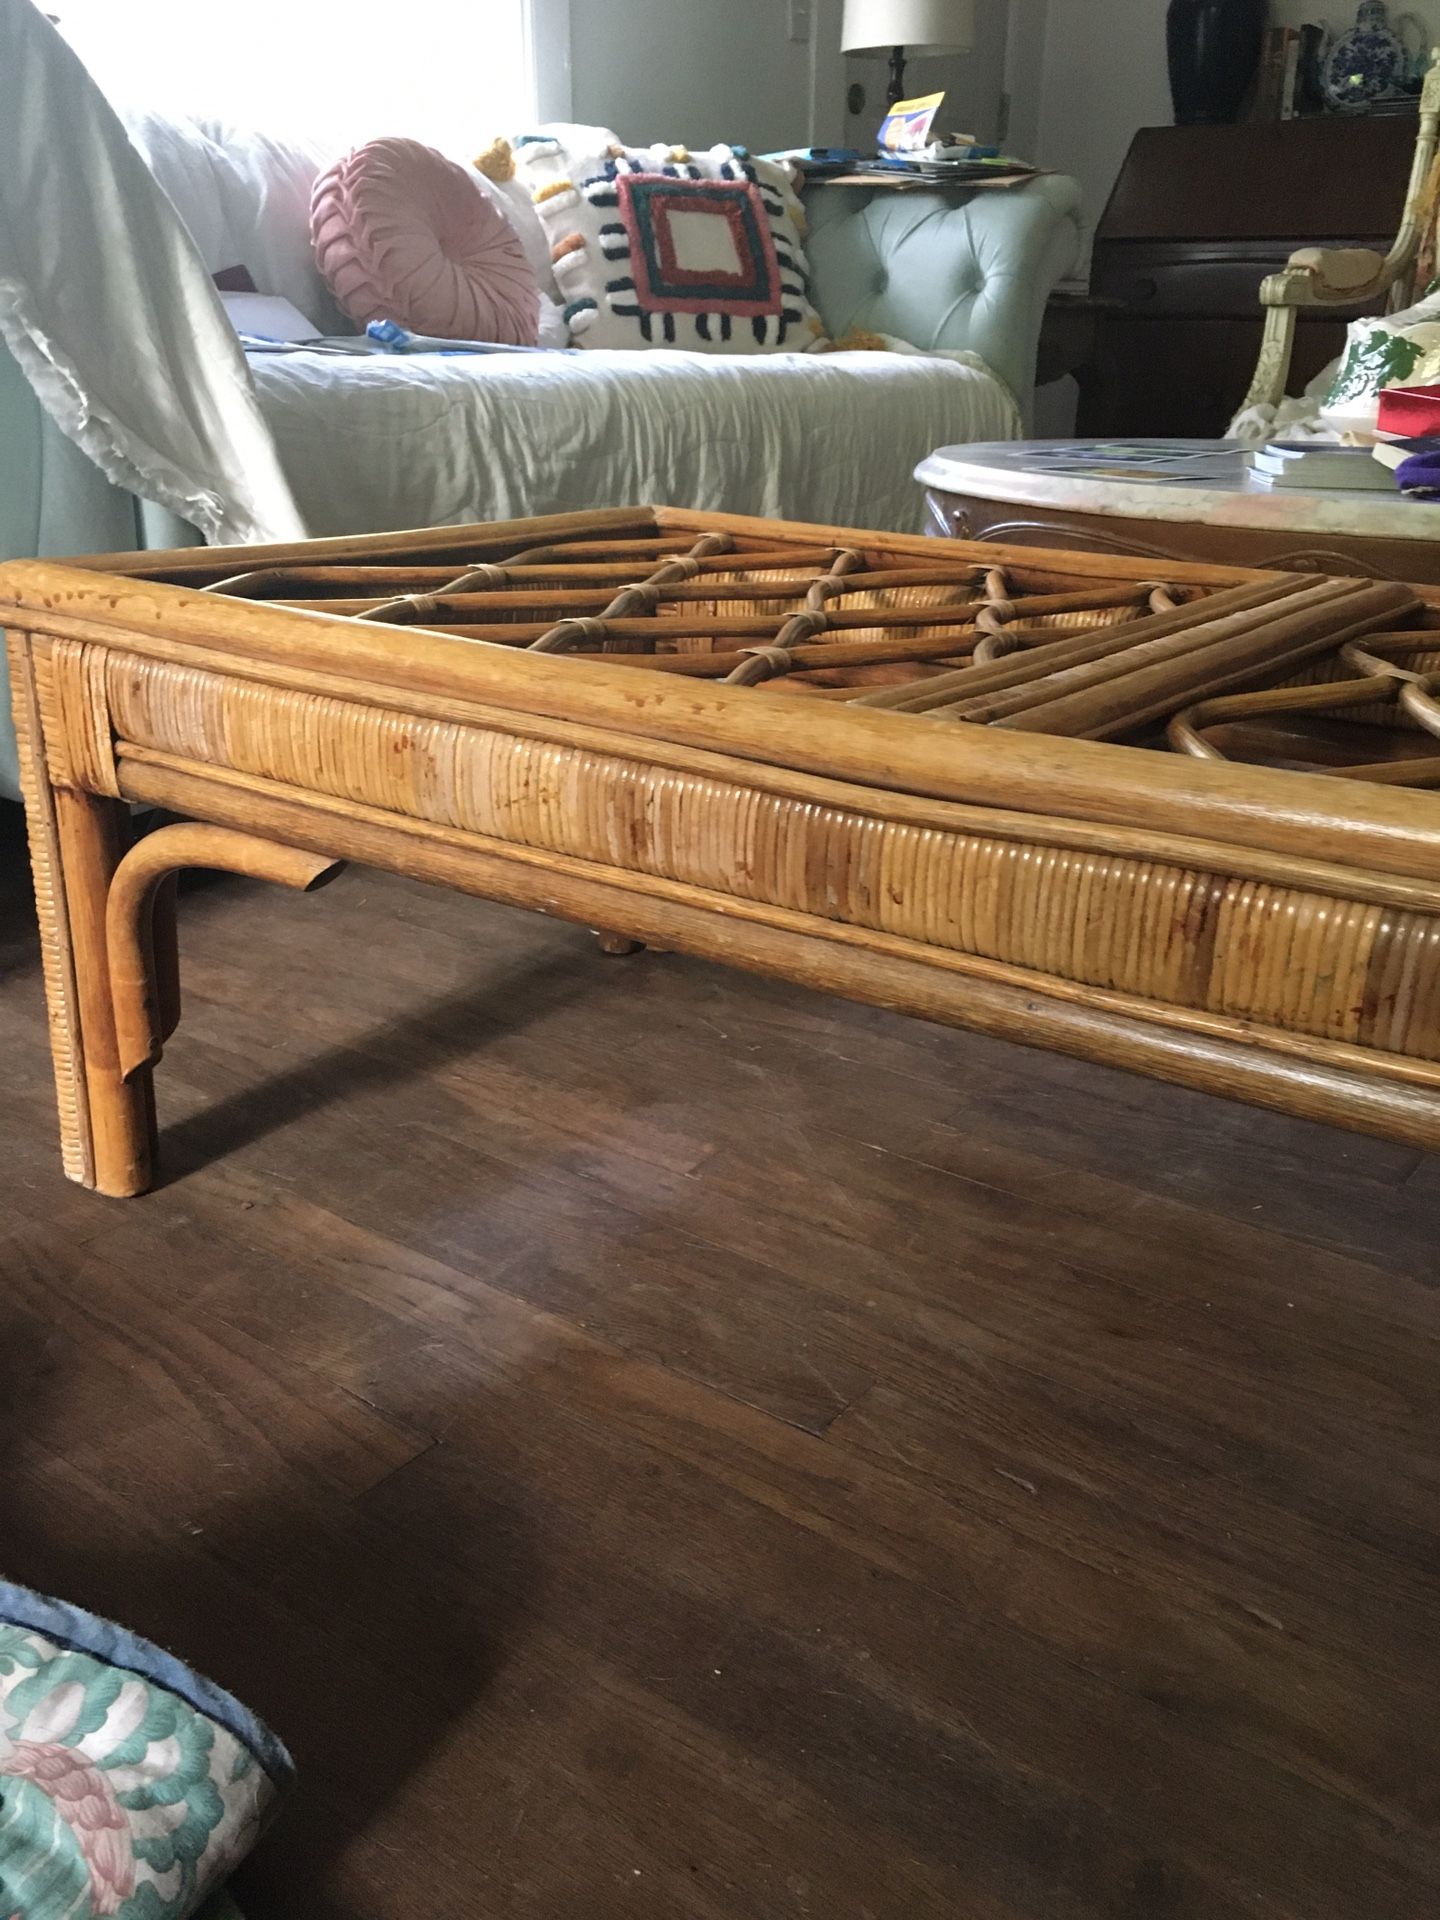 Vintage Rattan Table With Glass Top